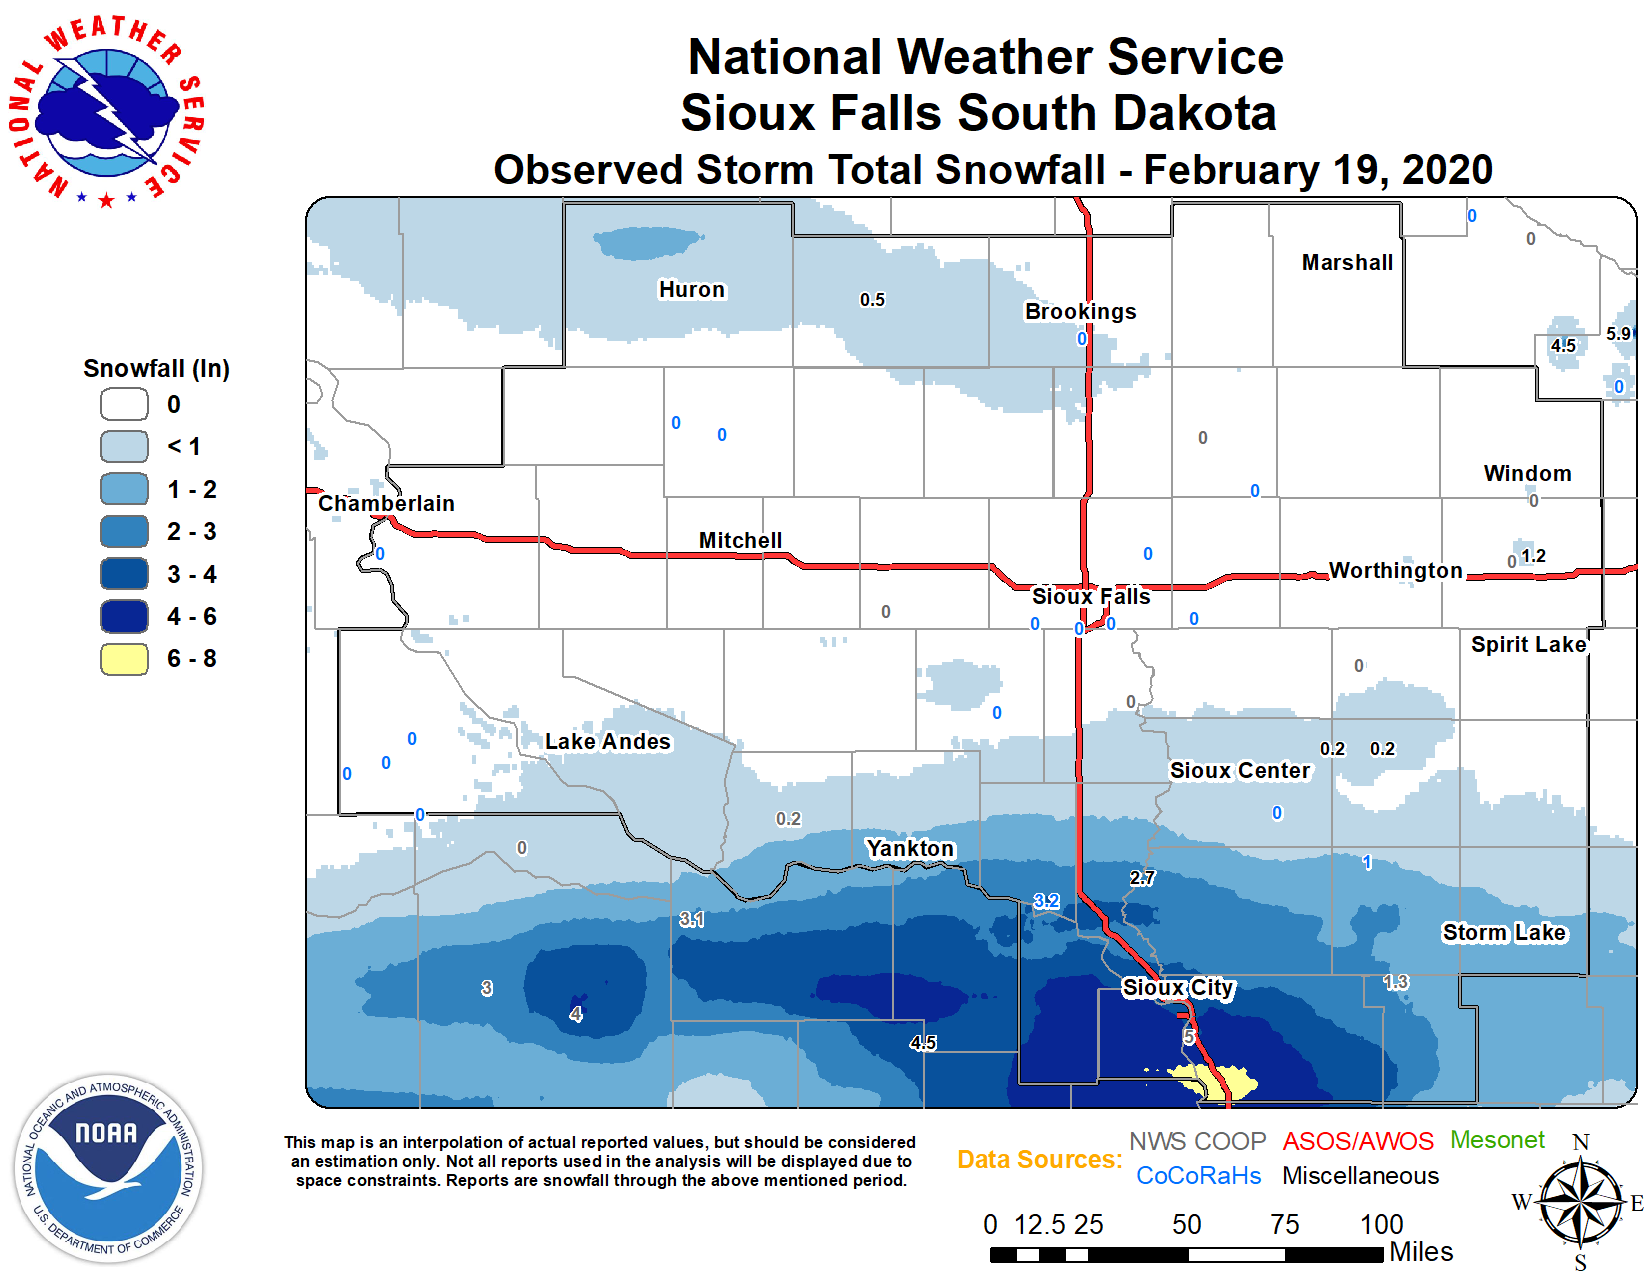 Map of Observed Snowfall for February 18-19, 2020